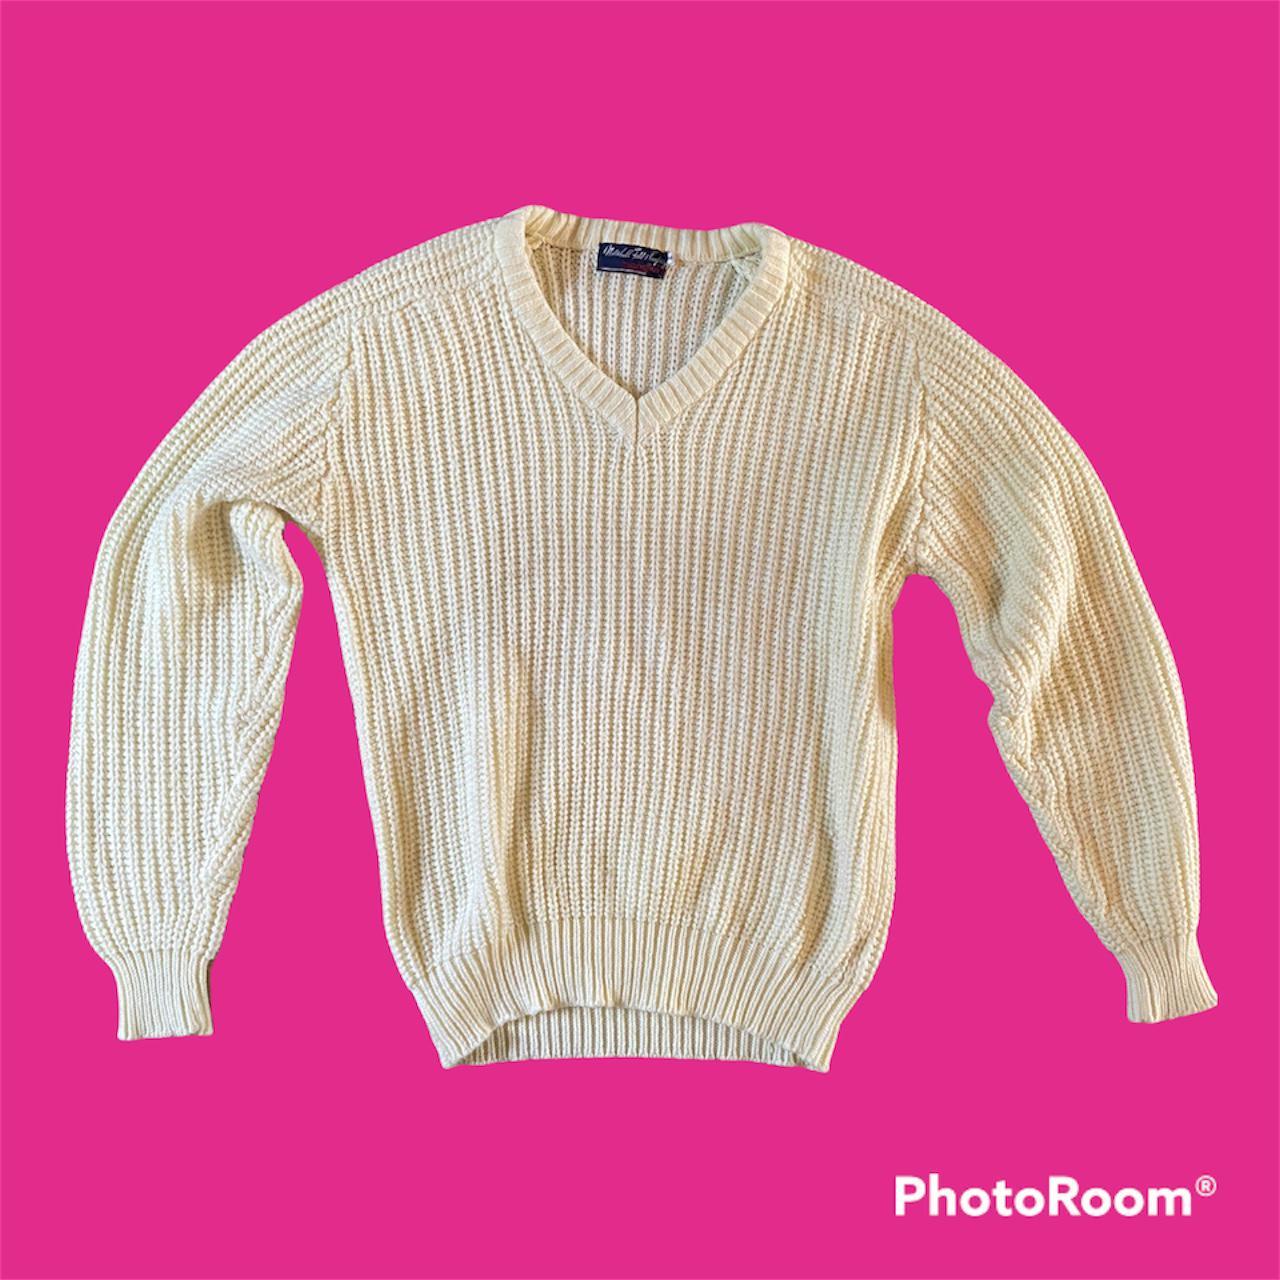 Product Image 1 - Vintage Cream Cable Knit Sweater!❄️
Pit